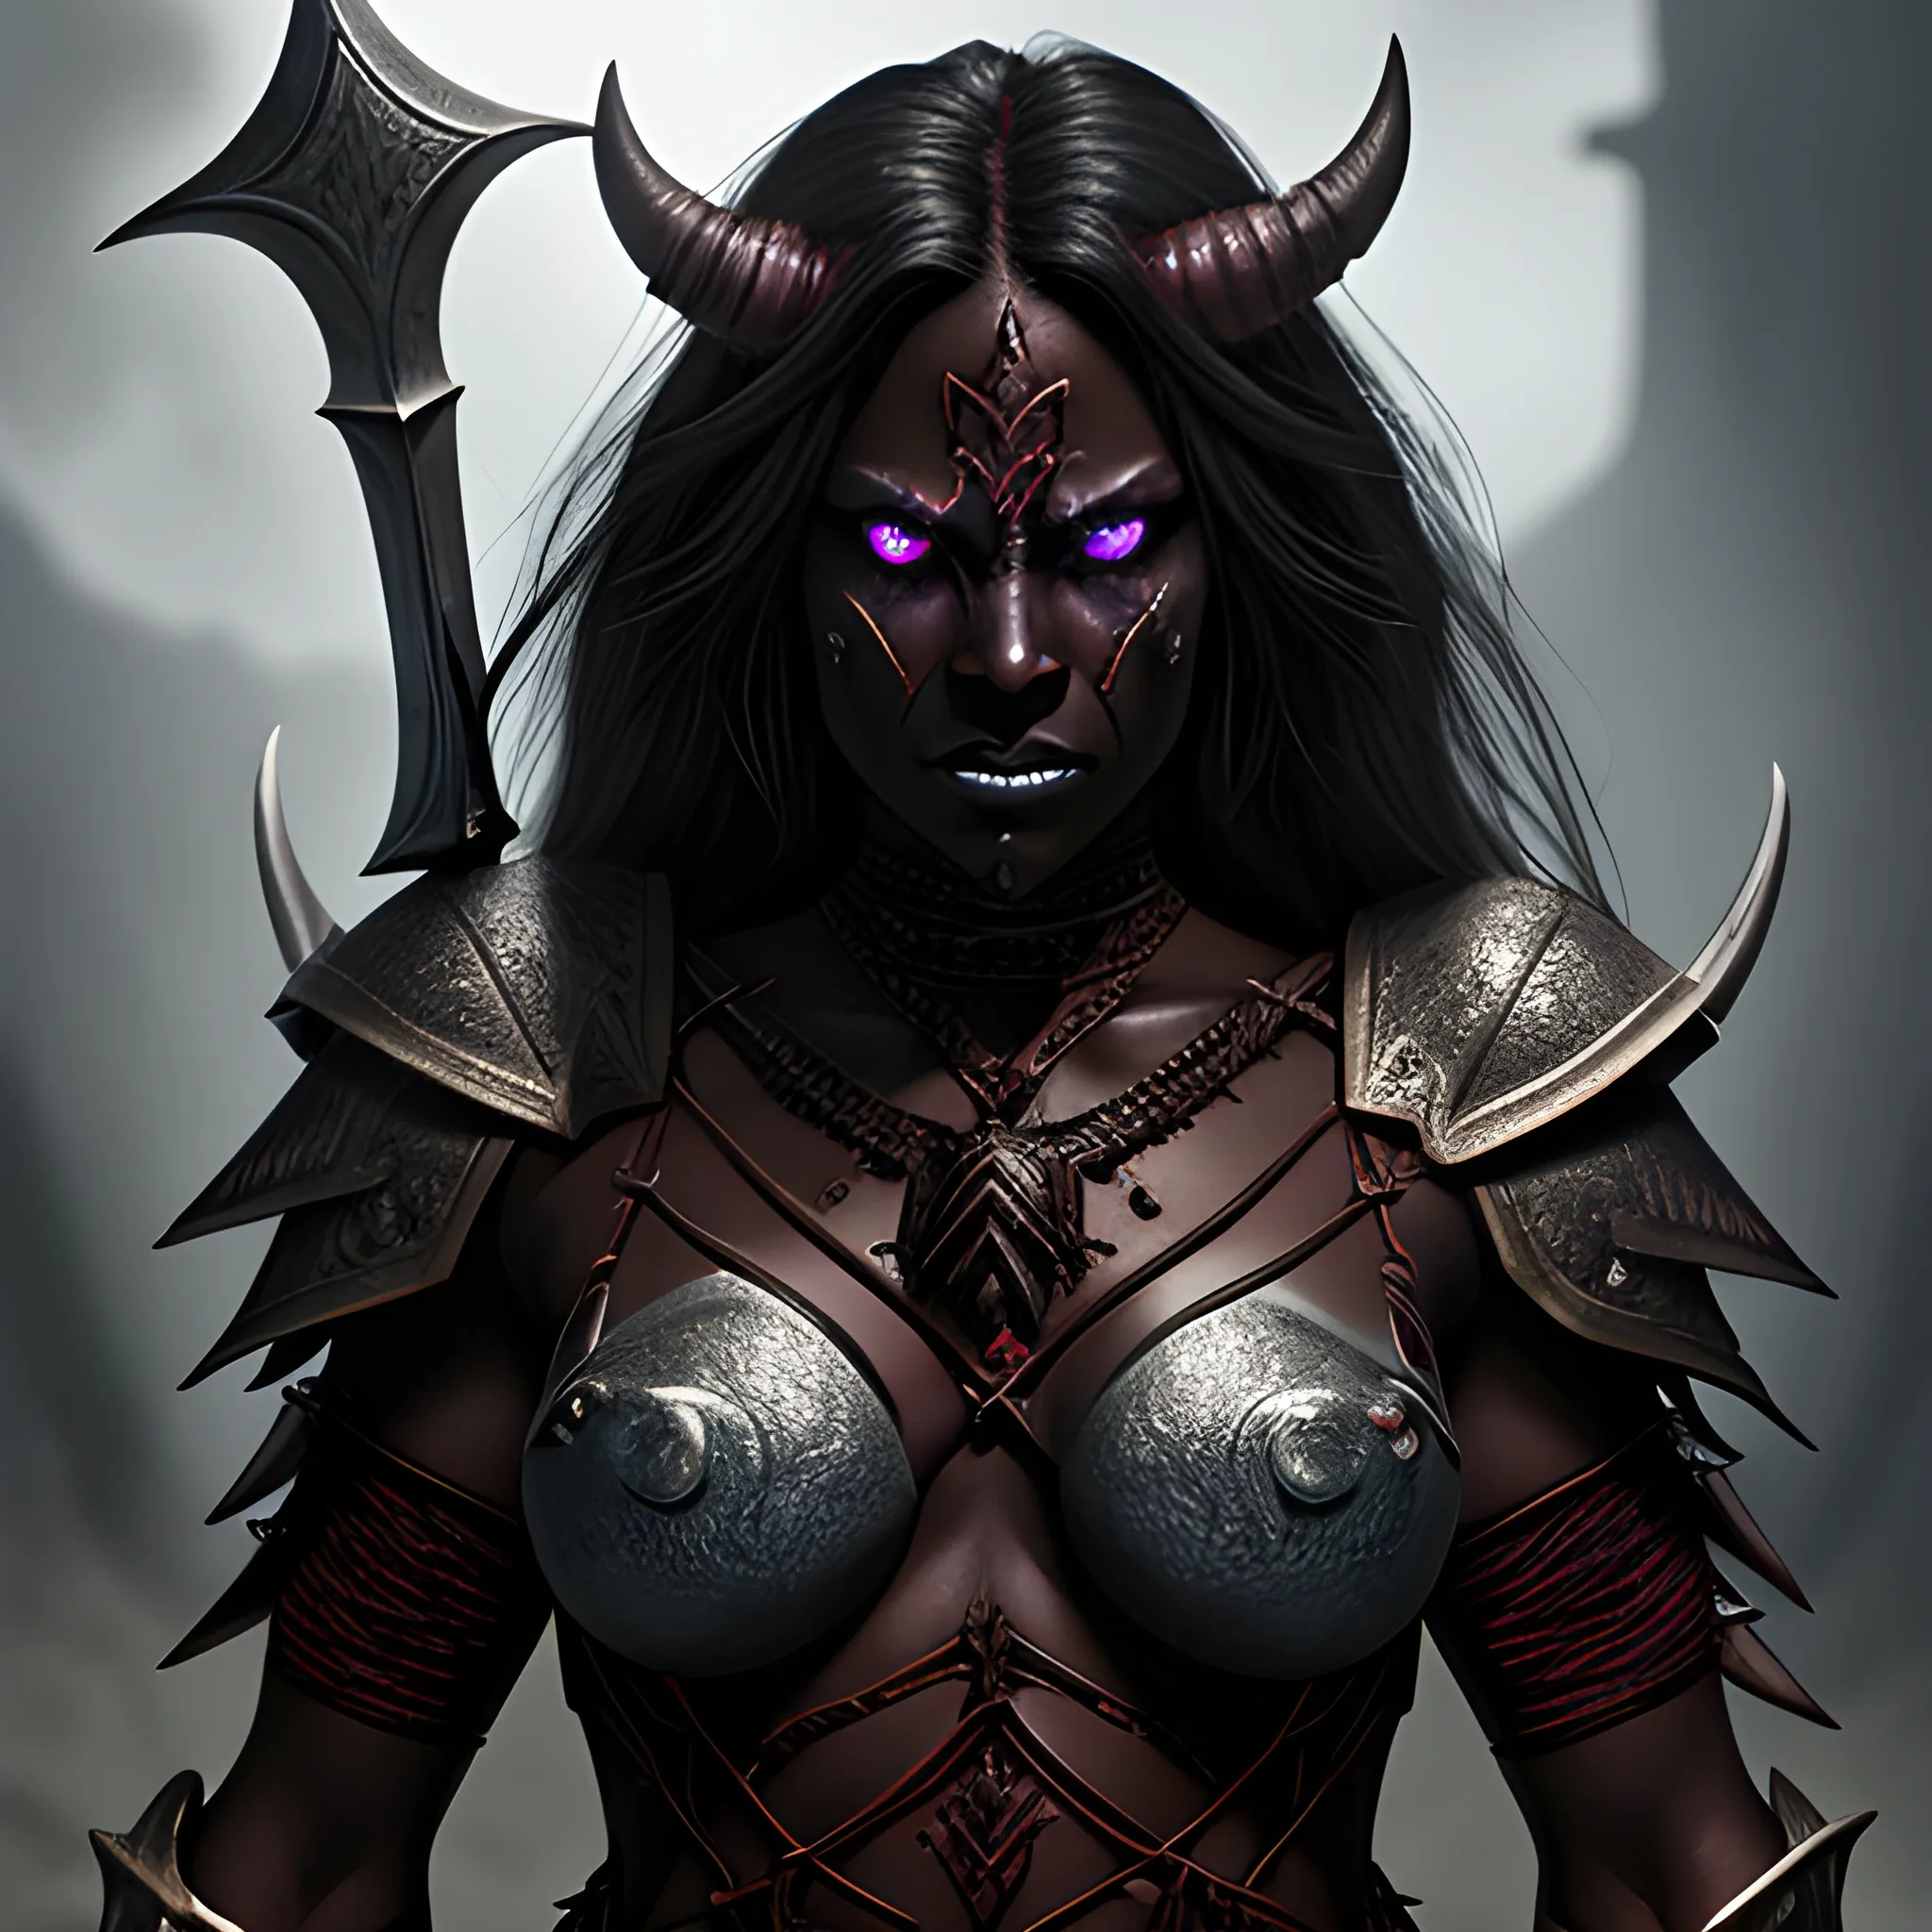 high definition, high fantasy D&D, intimidating dark skinned female demon with glowing eyes, in warrior armor